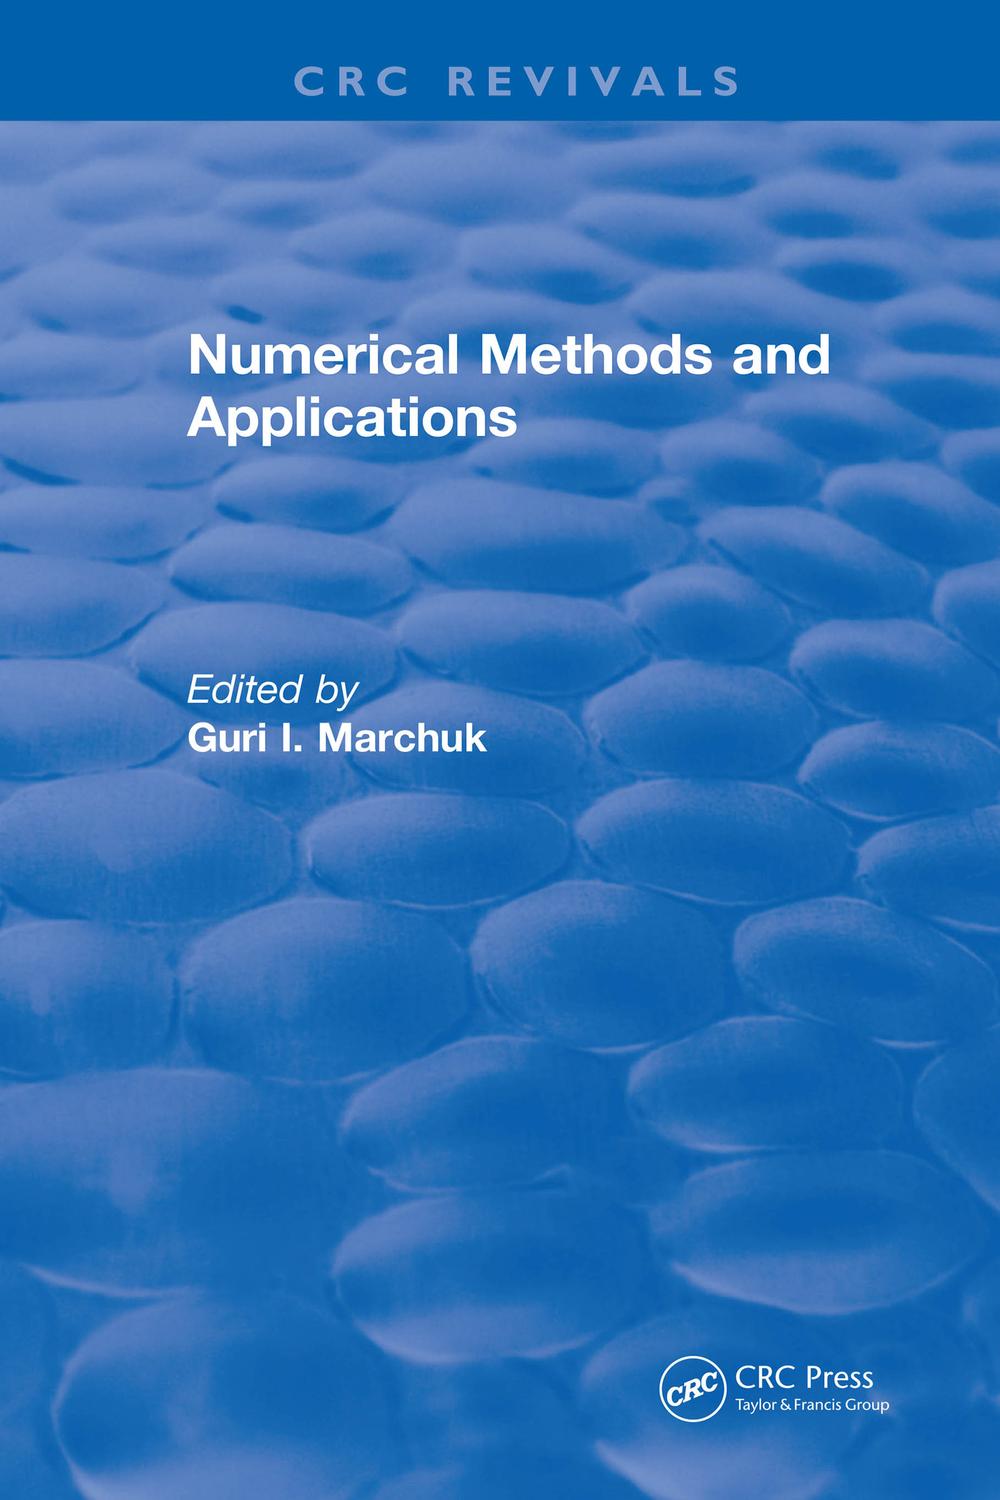 Numerical Methods and Applications (1994) - Guri I Marchuk